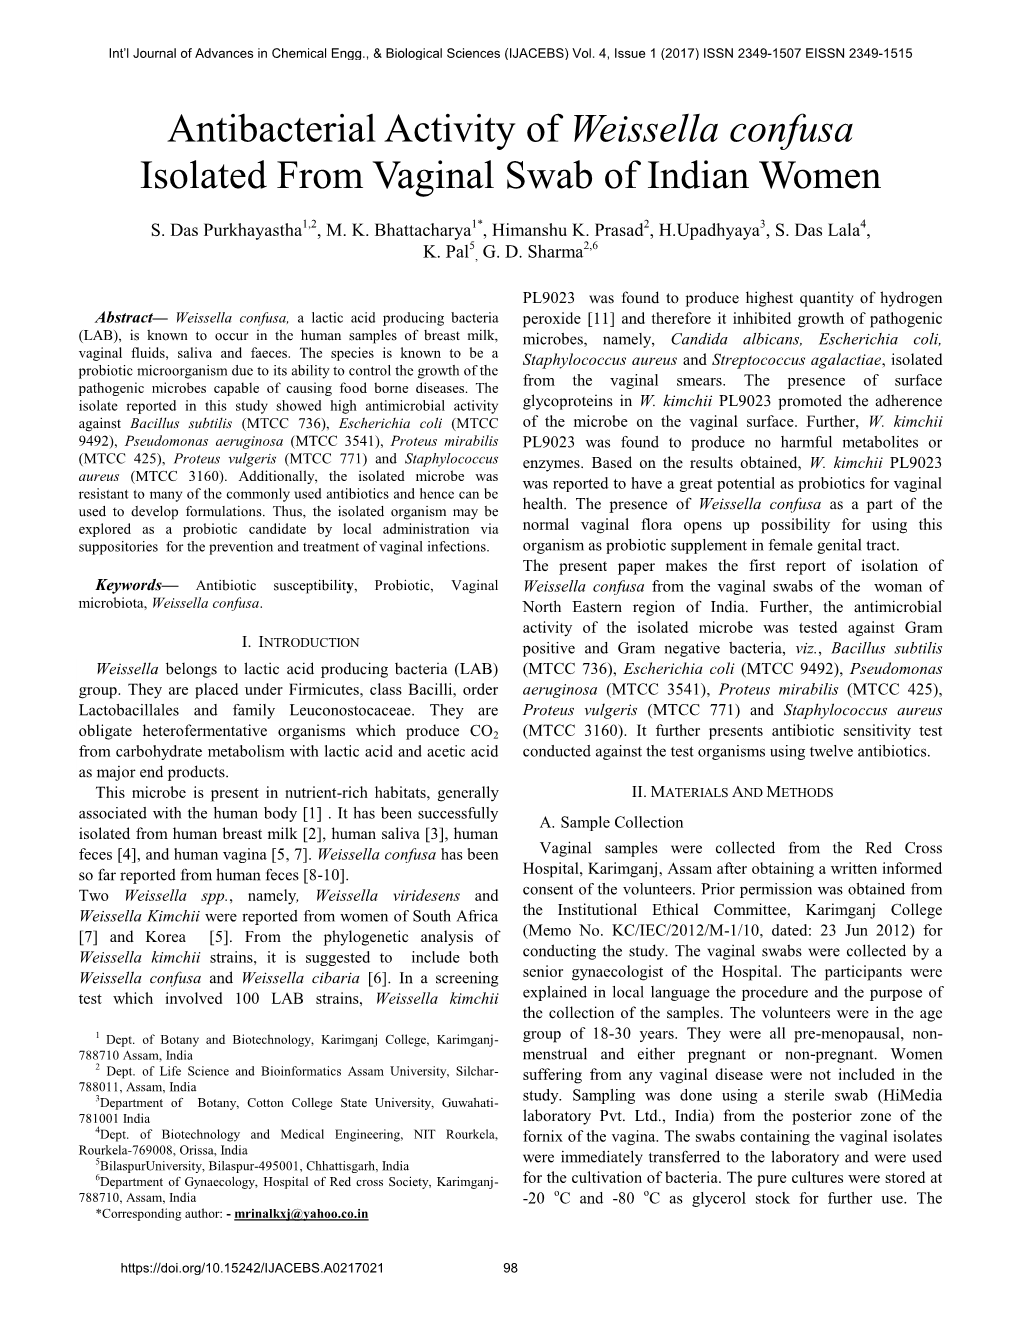 Weissella Confusa Isolated from Vaginal Swab of Indian Women